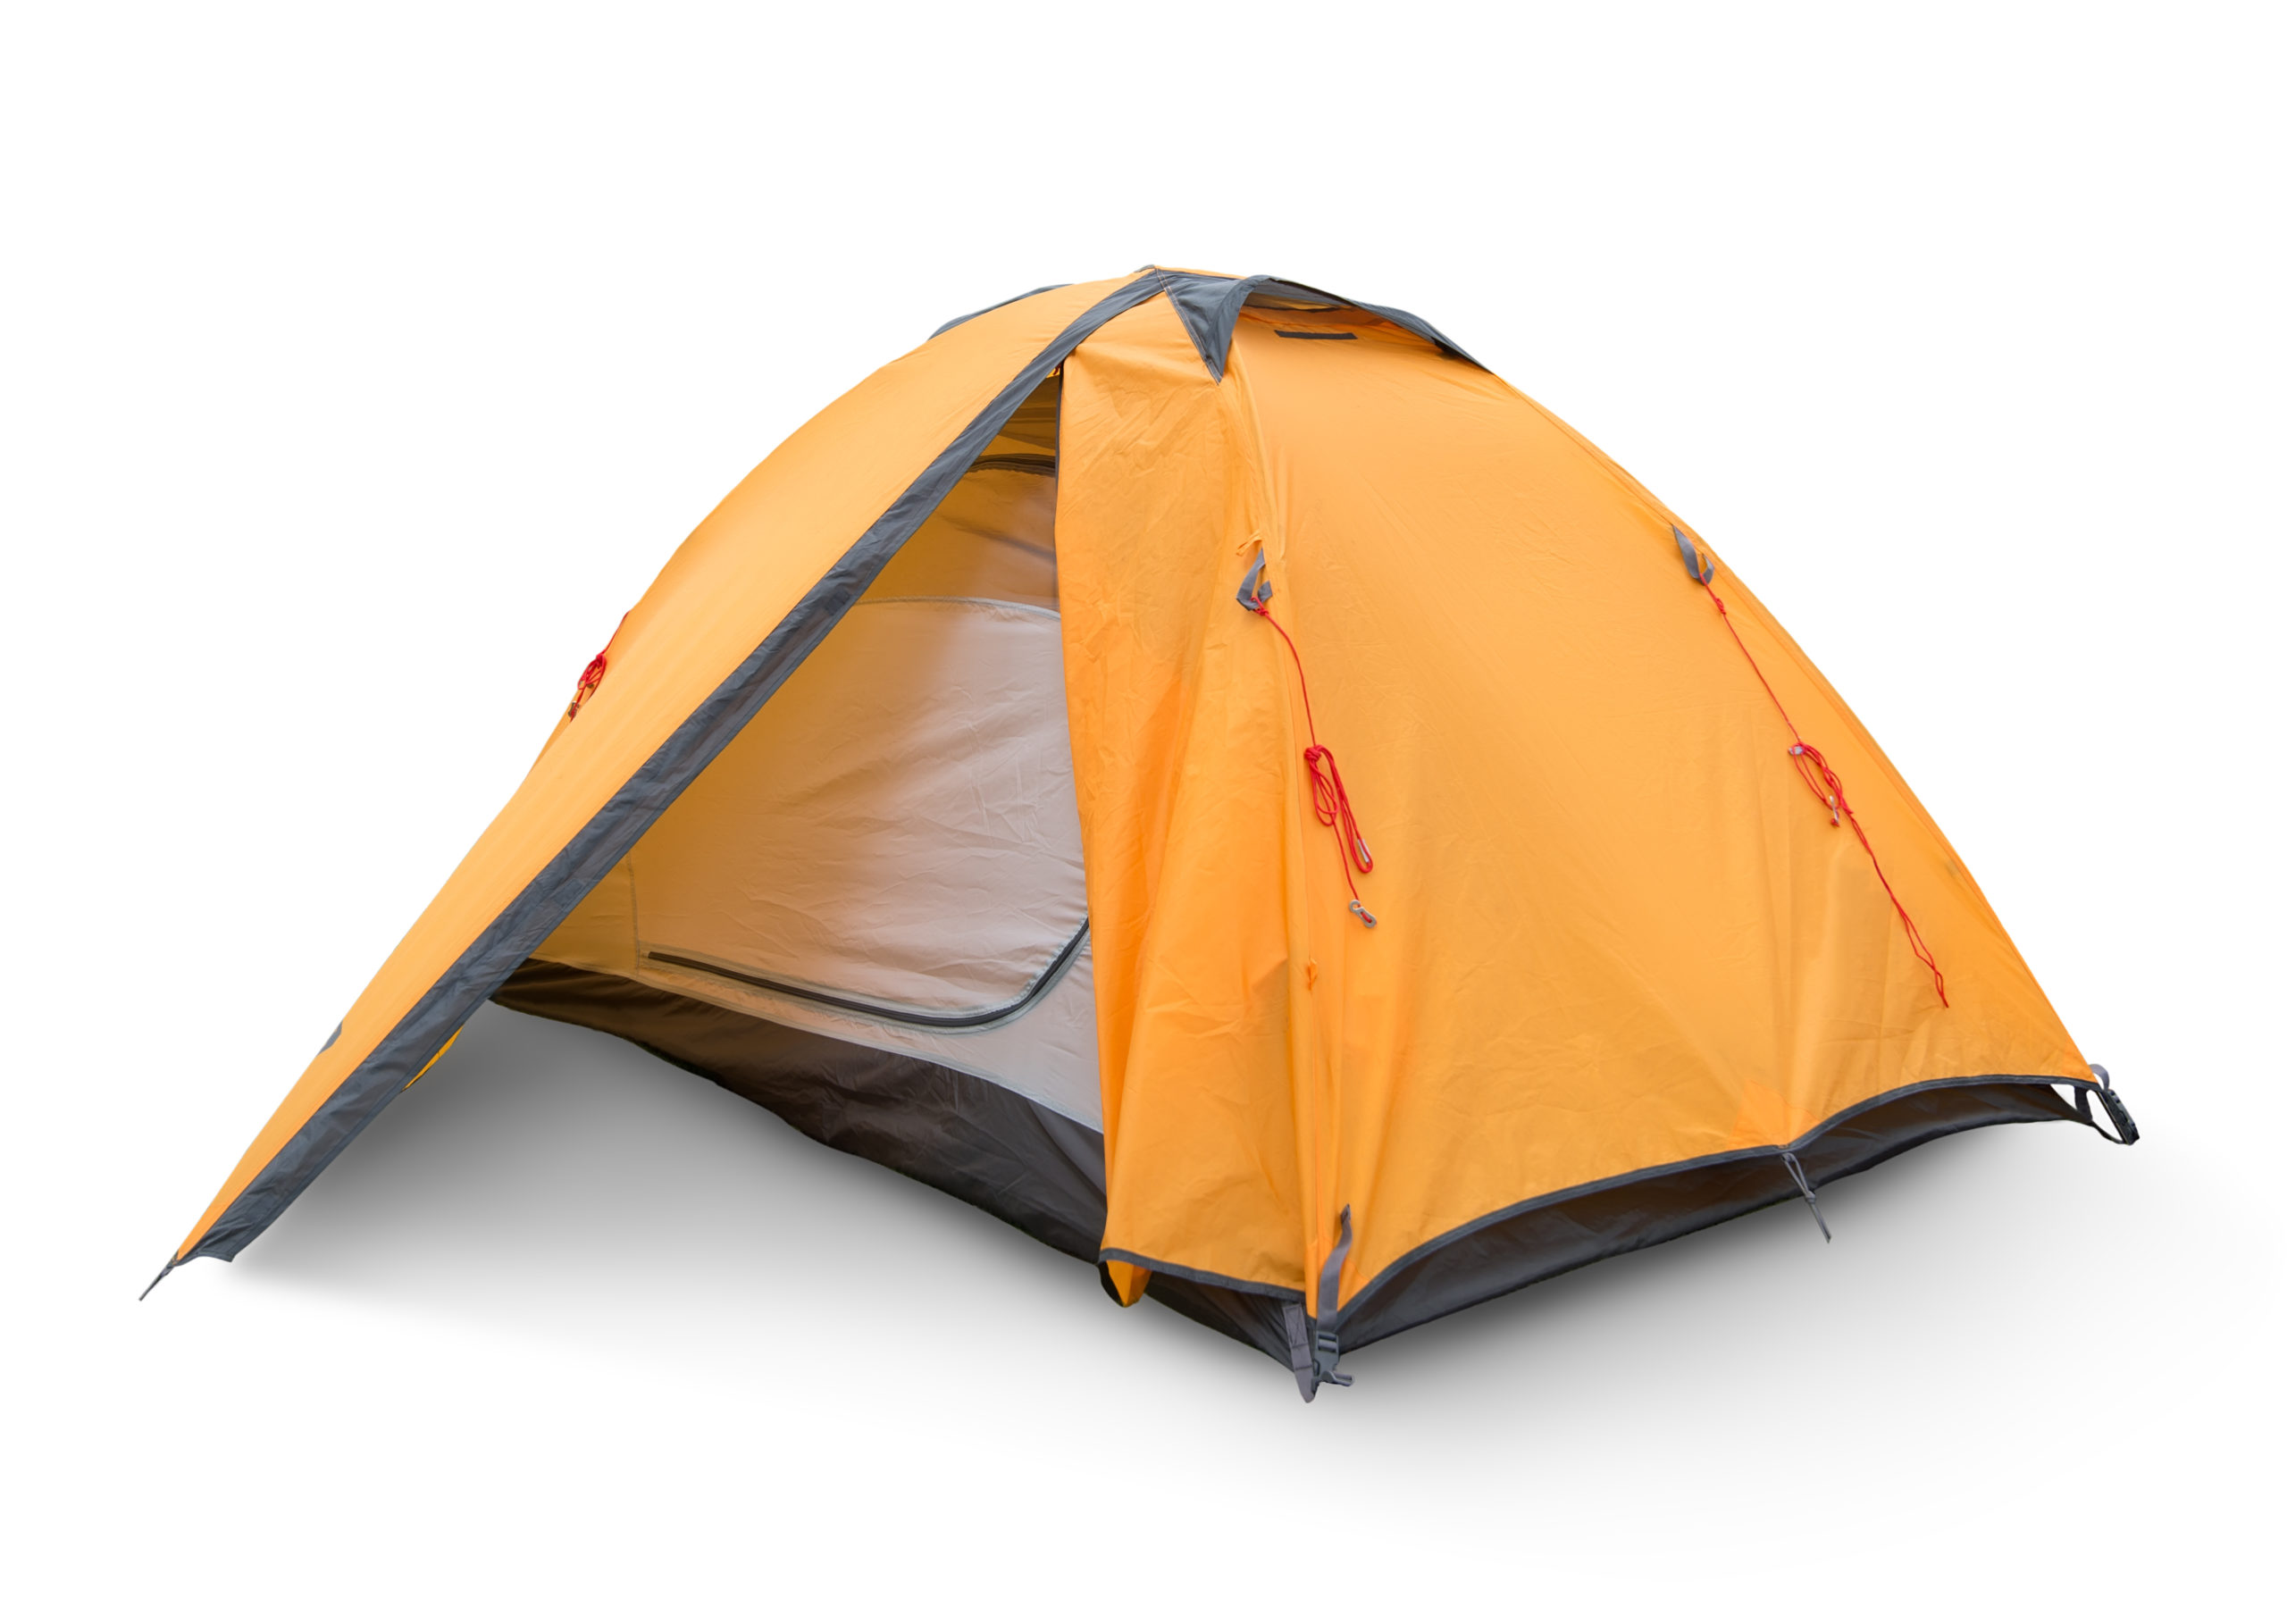 There’s been an 87% increase in tent sales since lockdown